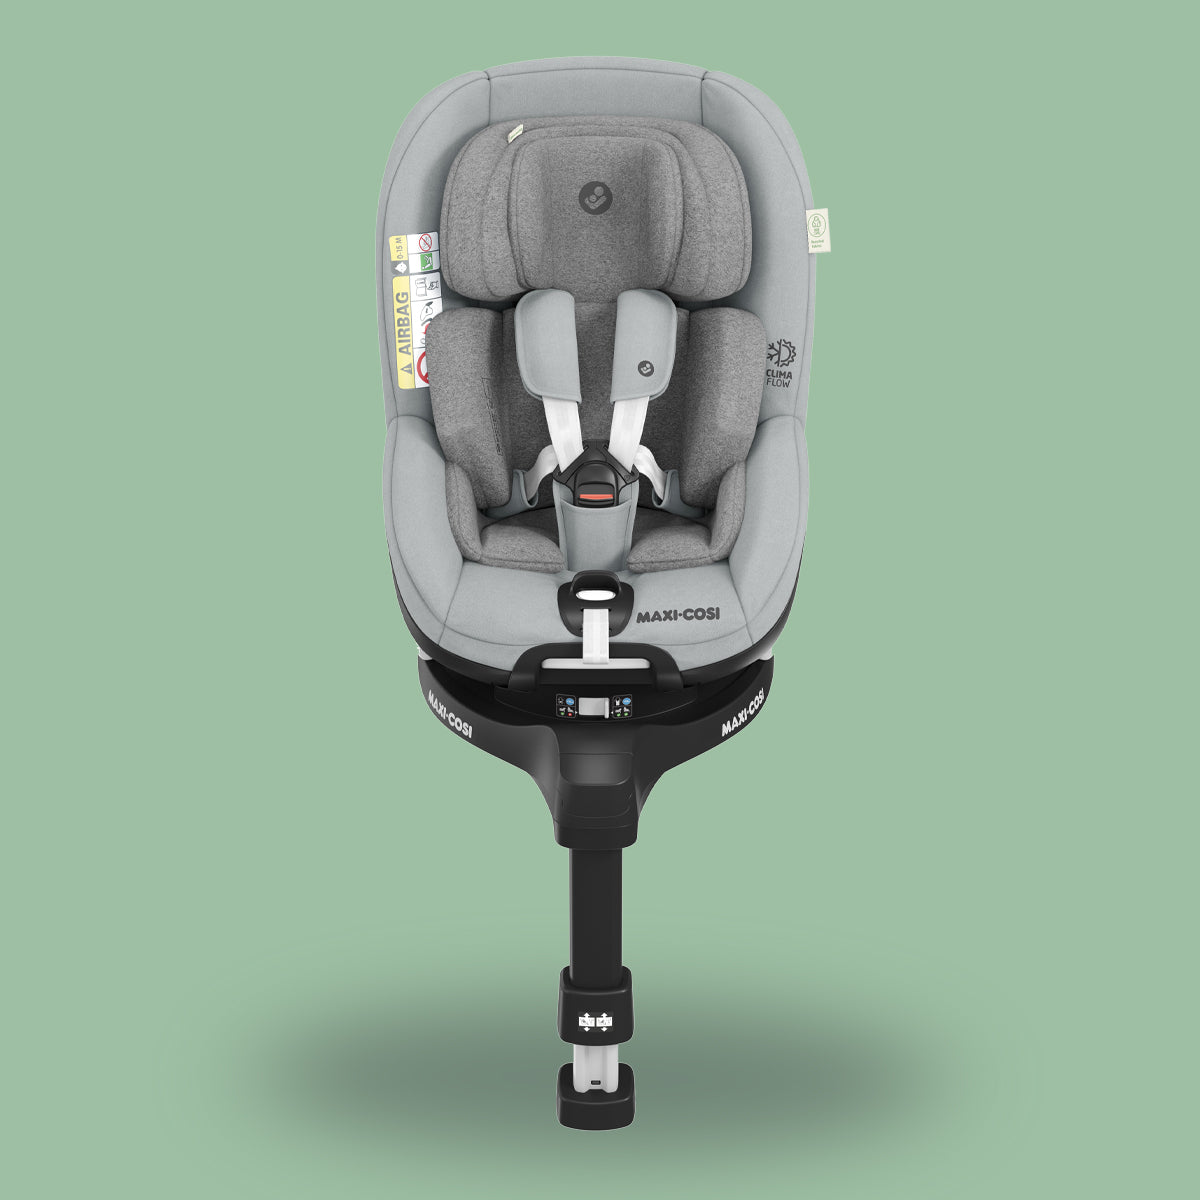 A Maxi-Cosi Mica Pro Eco i-Size baby car seat with a green background.